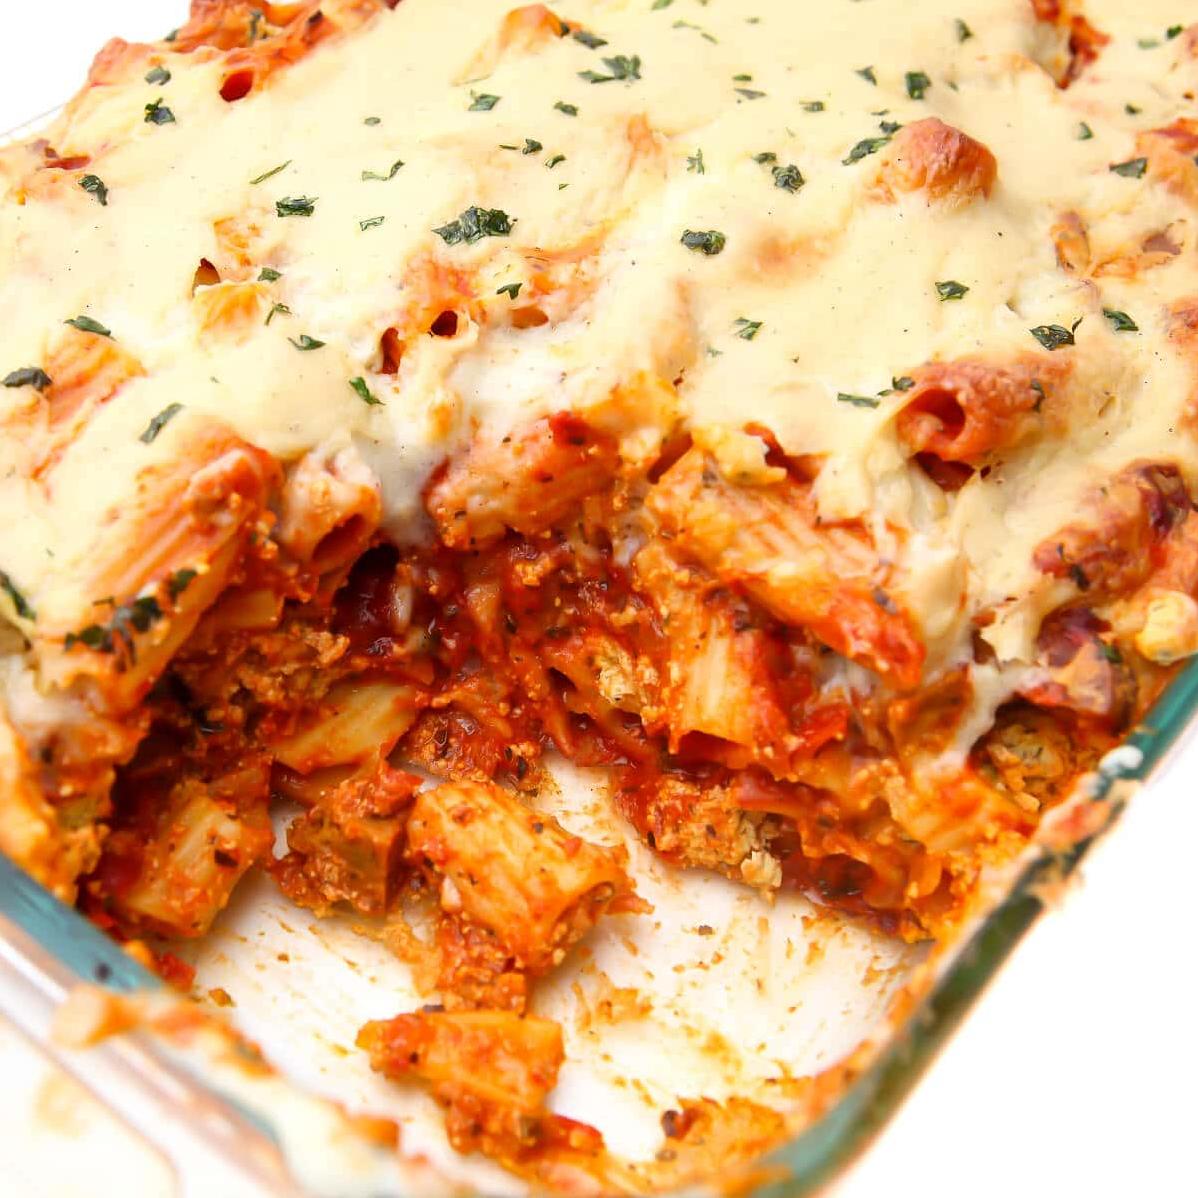  You won't believe it's vegan - this baked ziti recipe is that good!